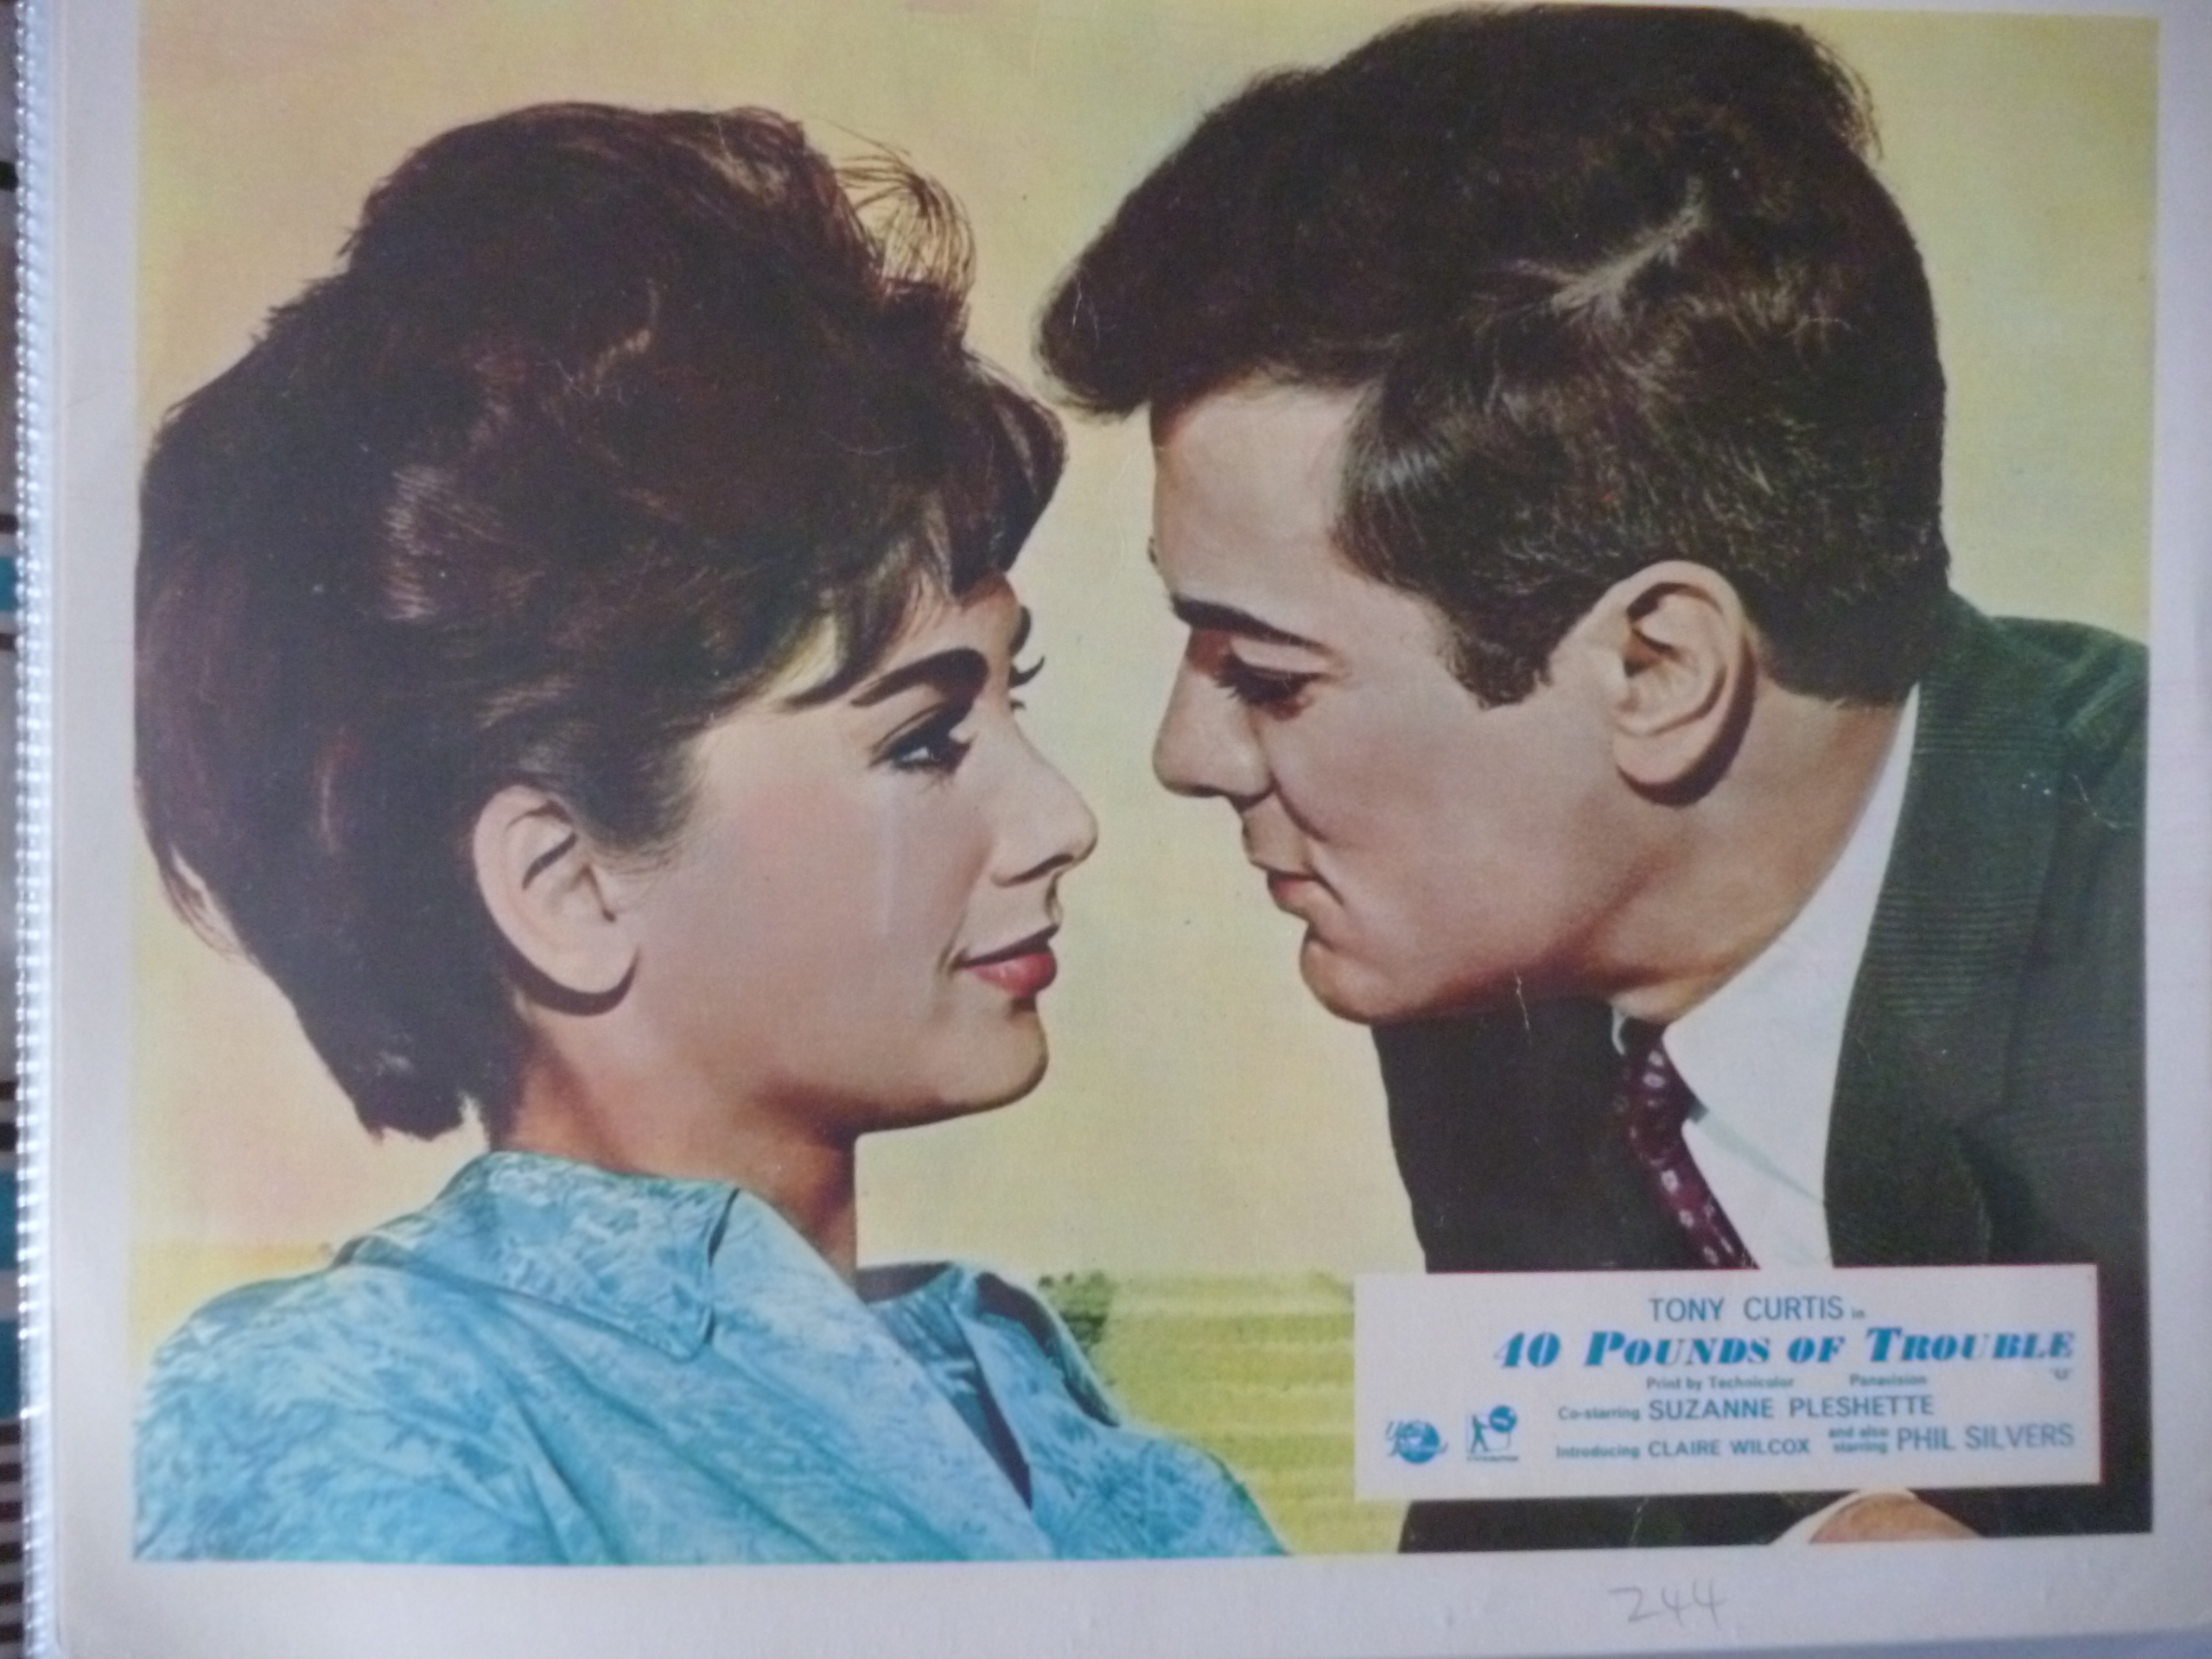 40 Pounds of Trouble (1962) Screenshot 2 